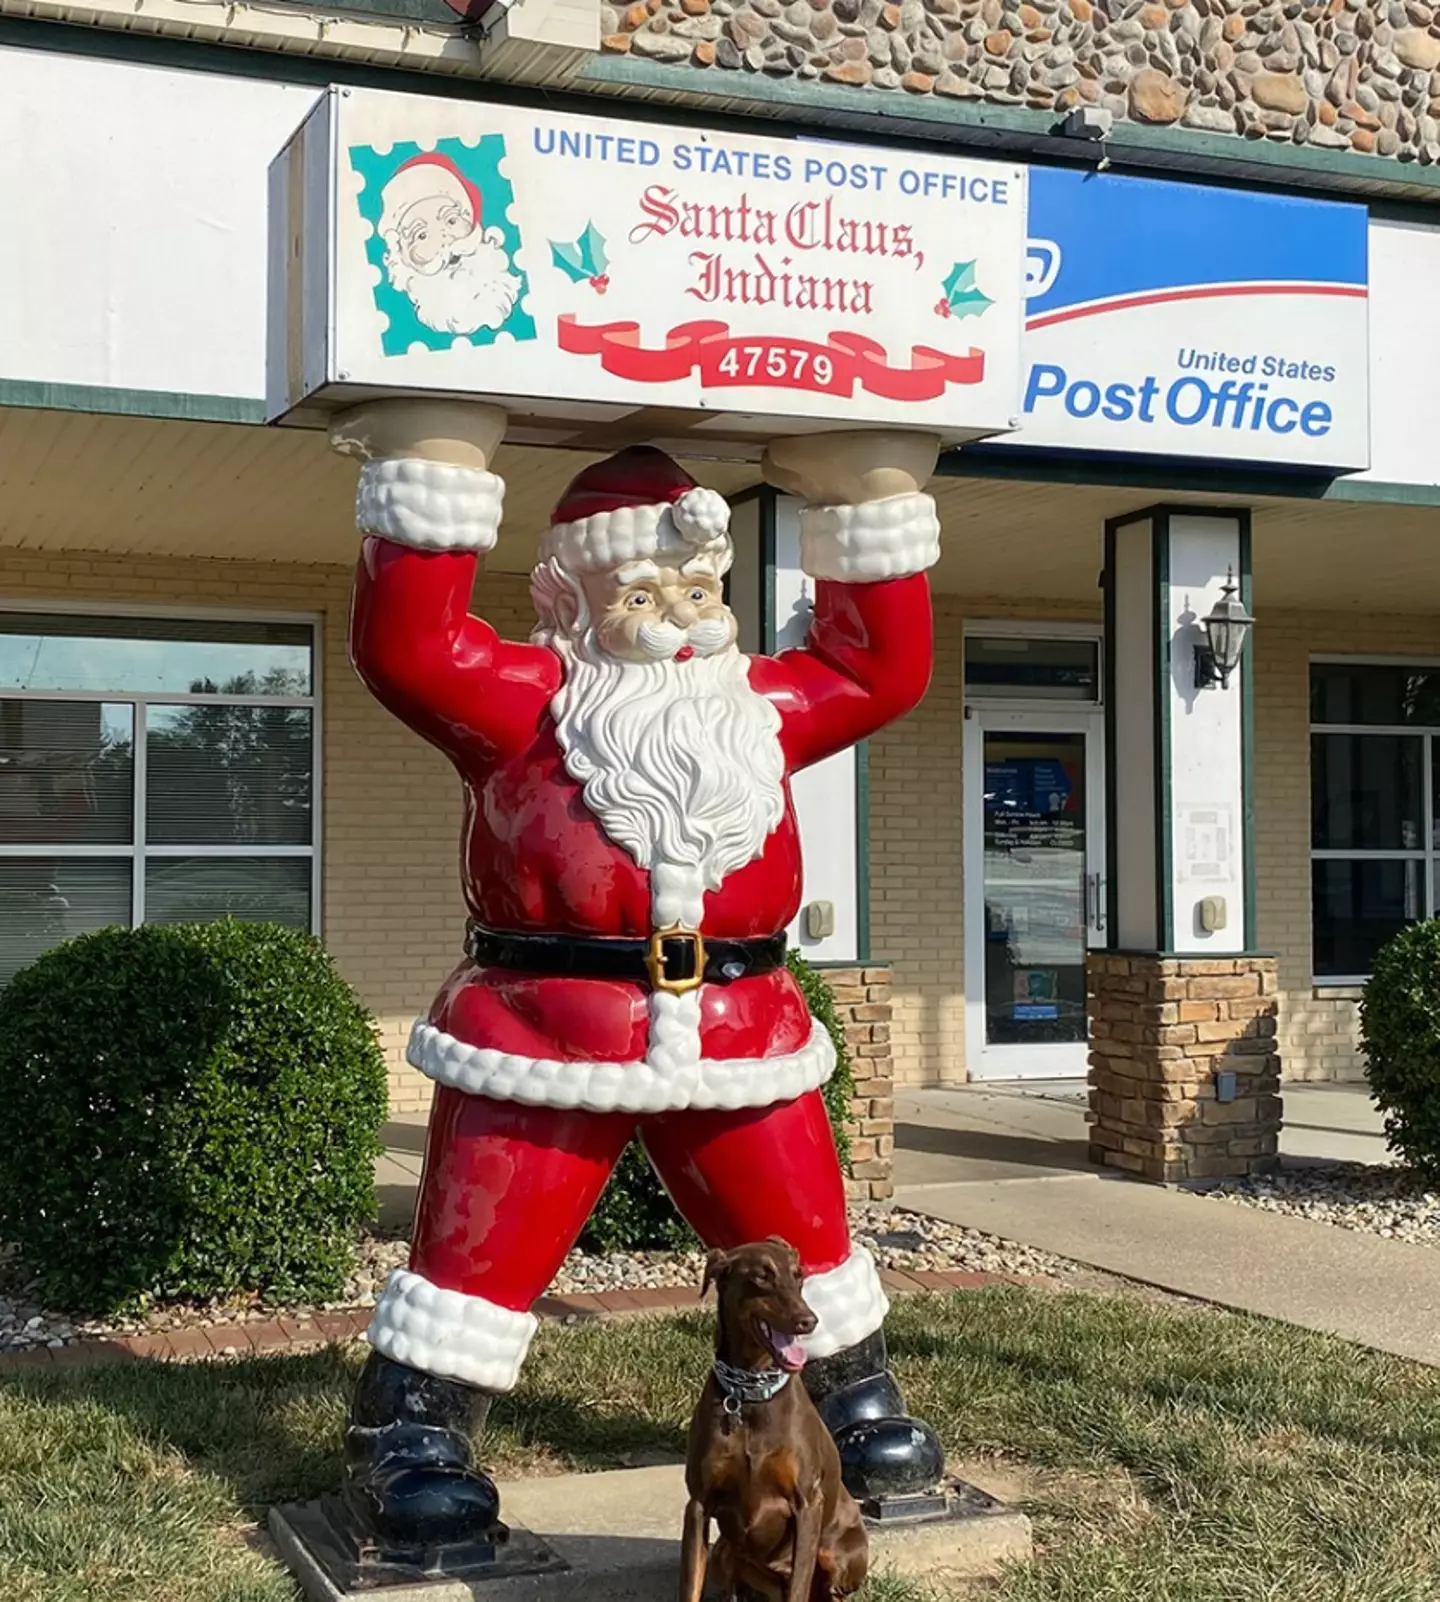 The town has numerous Santa Claus statues to celebrate its name.